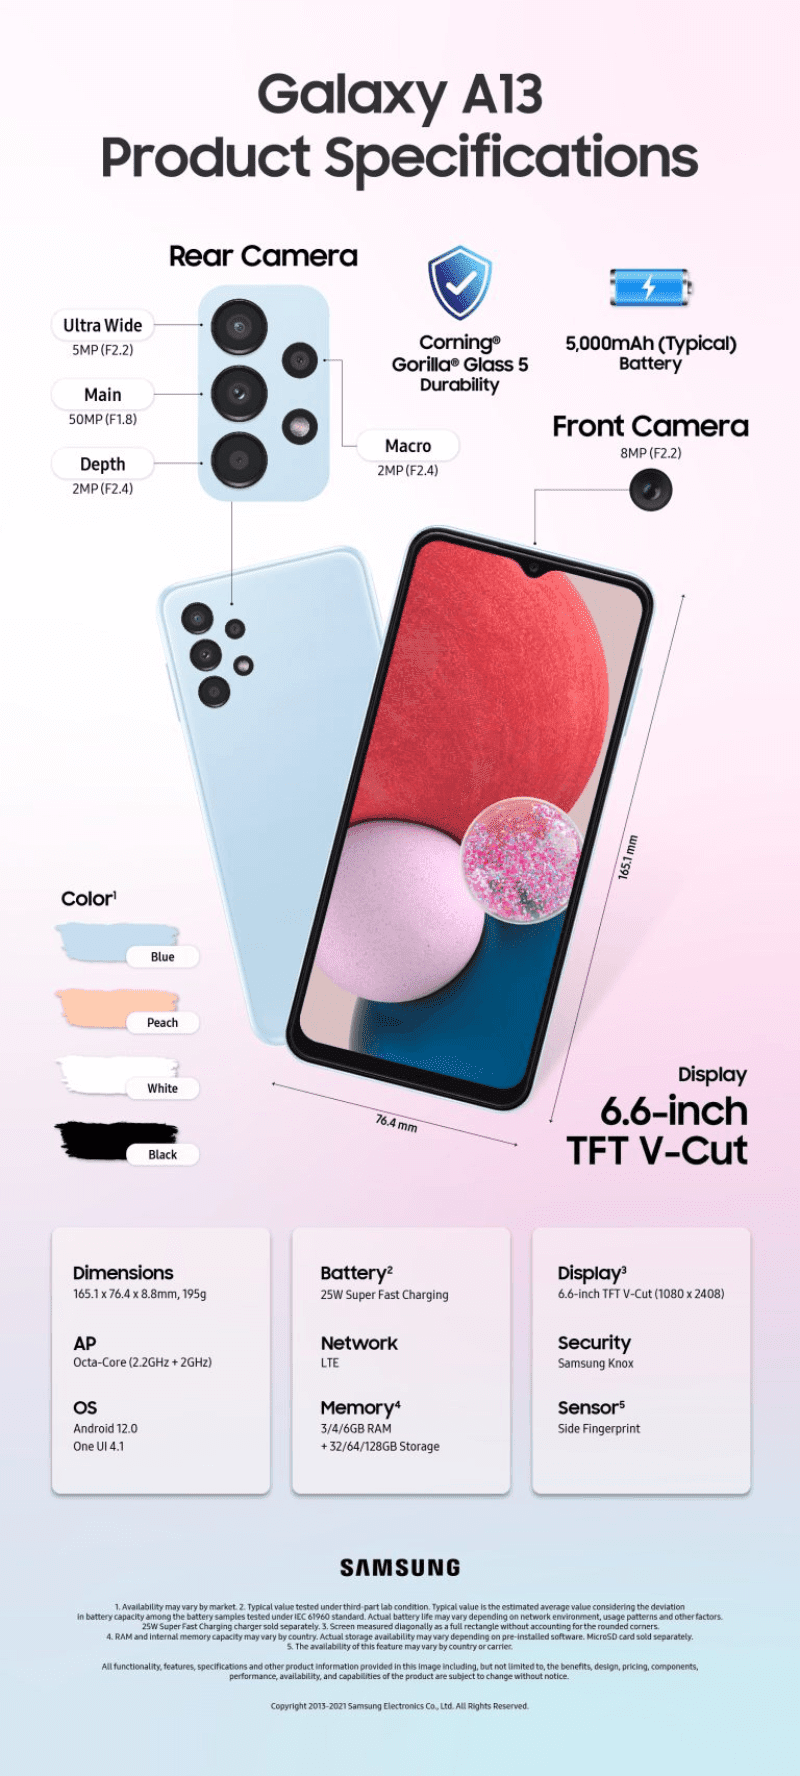 Galaxy A13 features